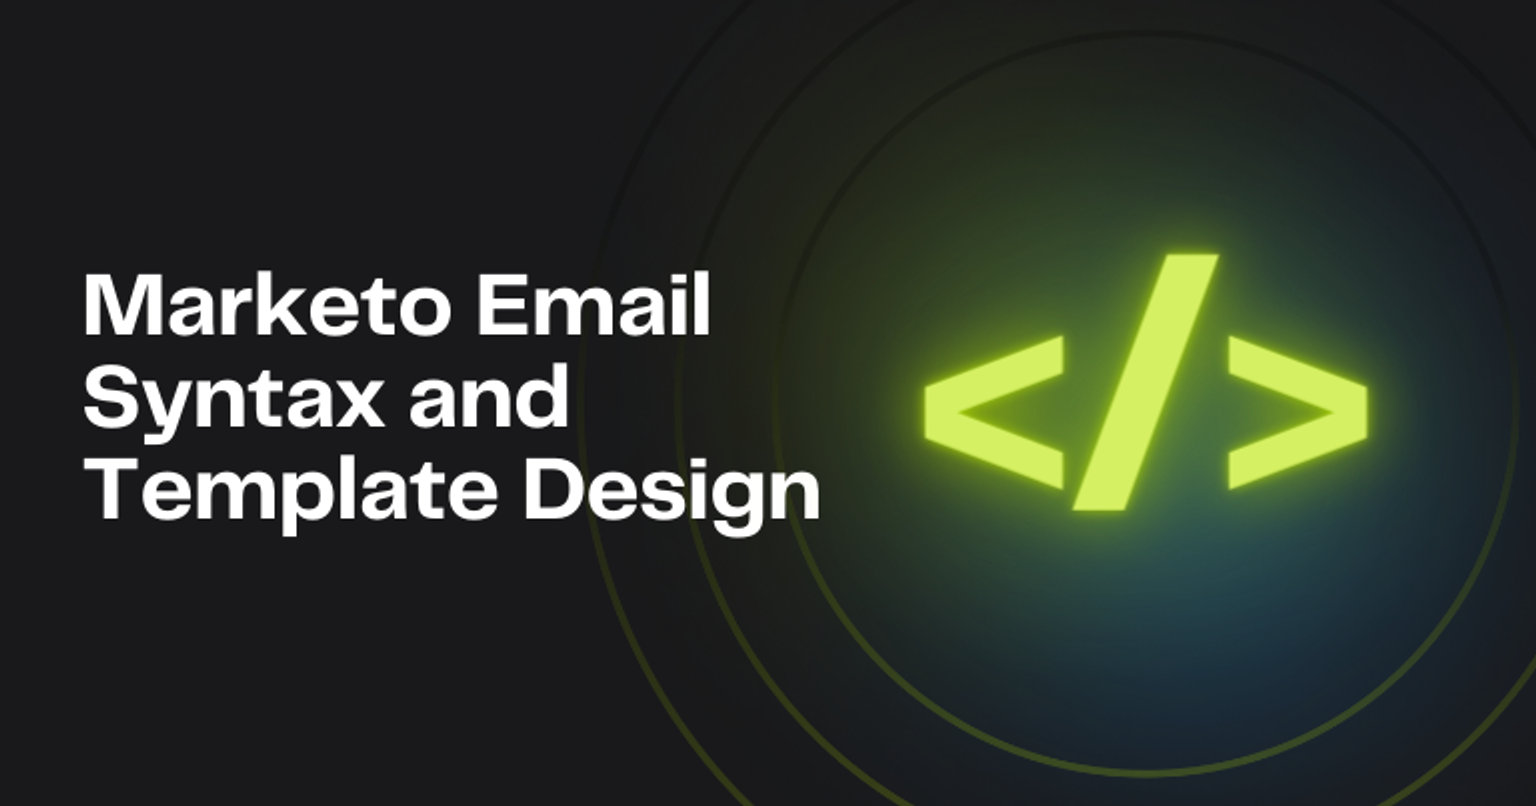 Guide to Marketo Email Syntax and Template Design